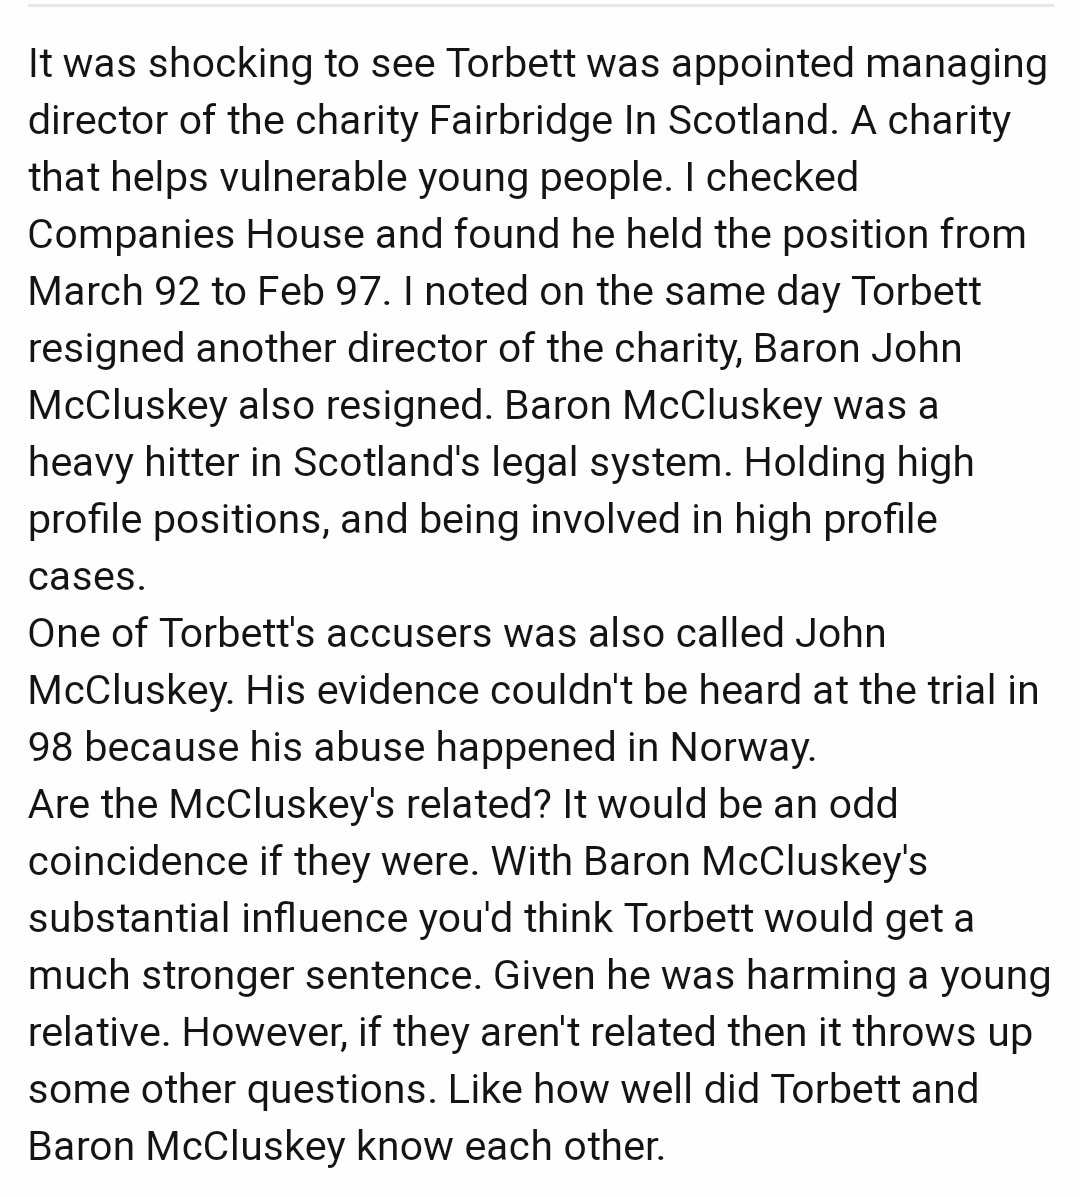 One of Henderson's most vocal supporters was Lord McCluskey, a leading judge who also jumped to the defence of the convicted paedophile Jim Torbett of Celtic FC. Both were directors at Fairbridge in Scotland, a charity for vulnerable young people. https://www.dailymail.co.uk/news/article-2724364/A-magic-circle-judges-sex-abuse-probe-sinister-truth-Fettesgate-scandal.html